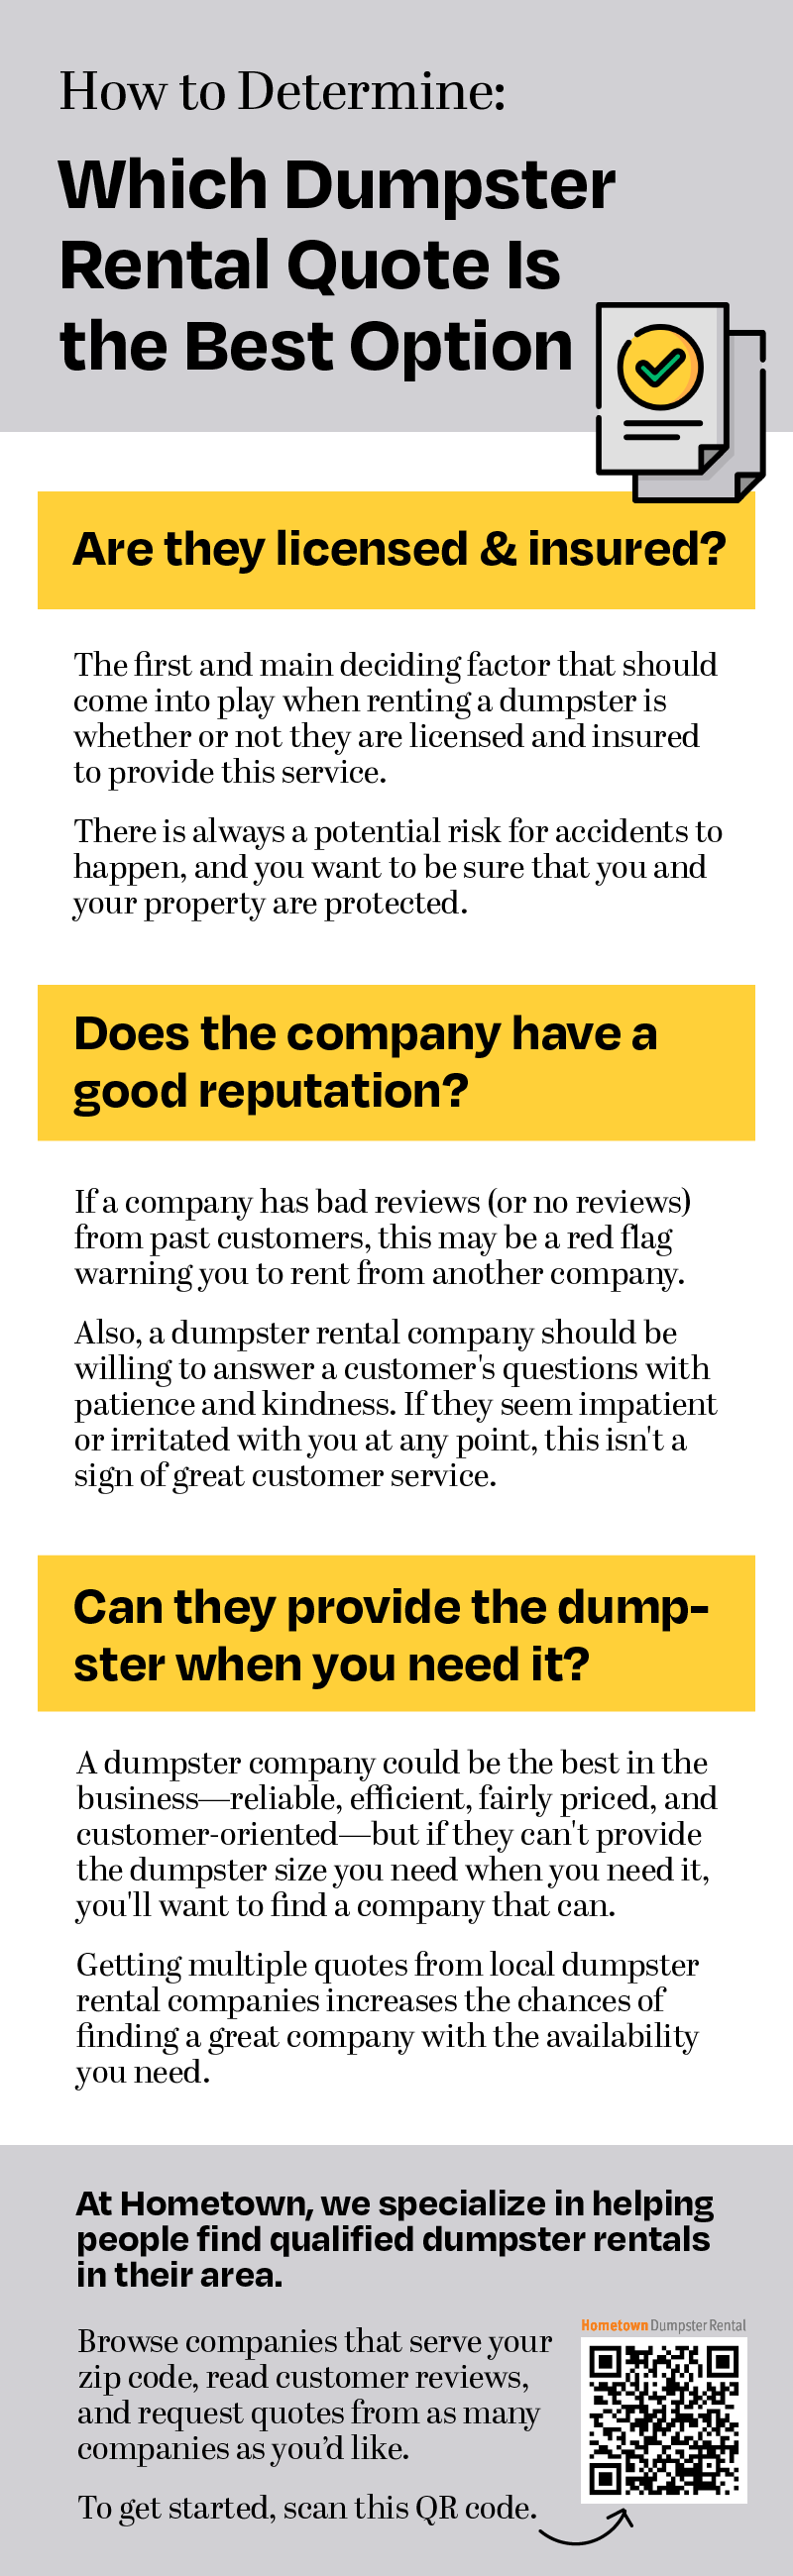 determine which dumpster rental quote is best infographic